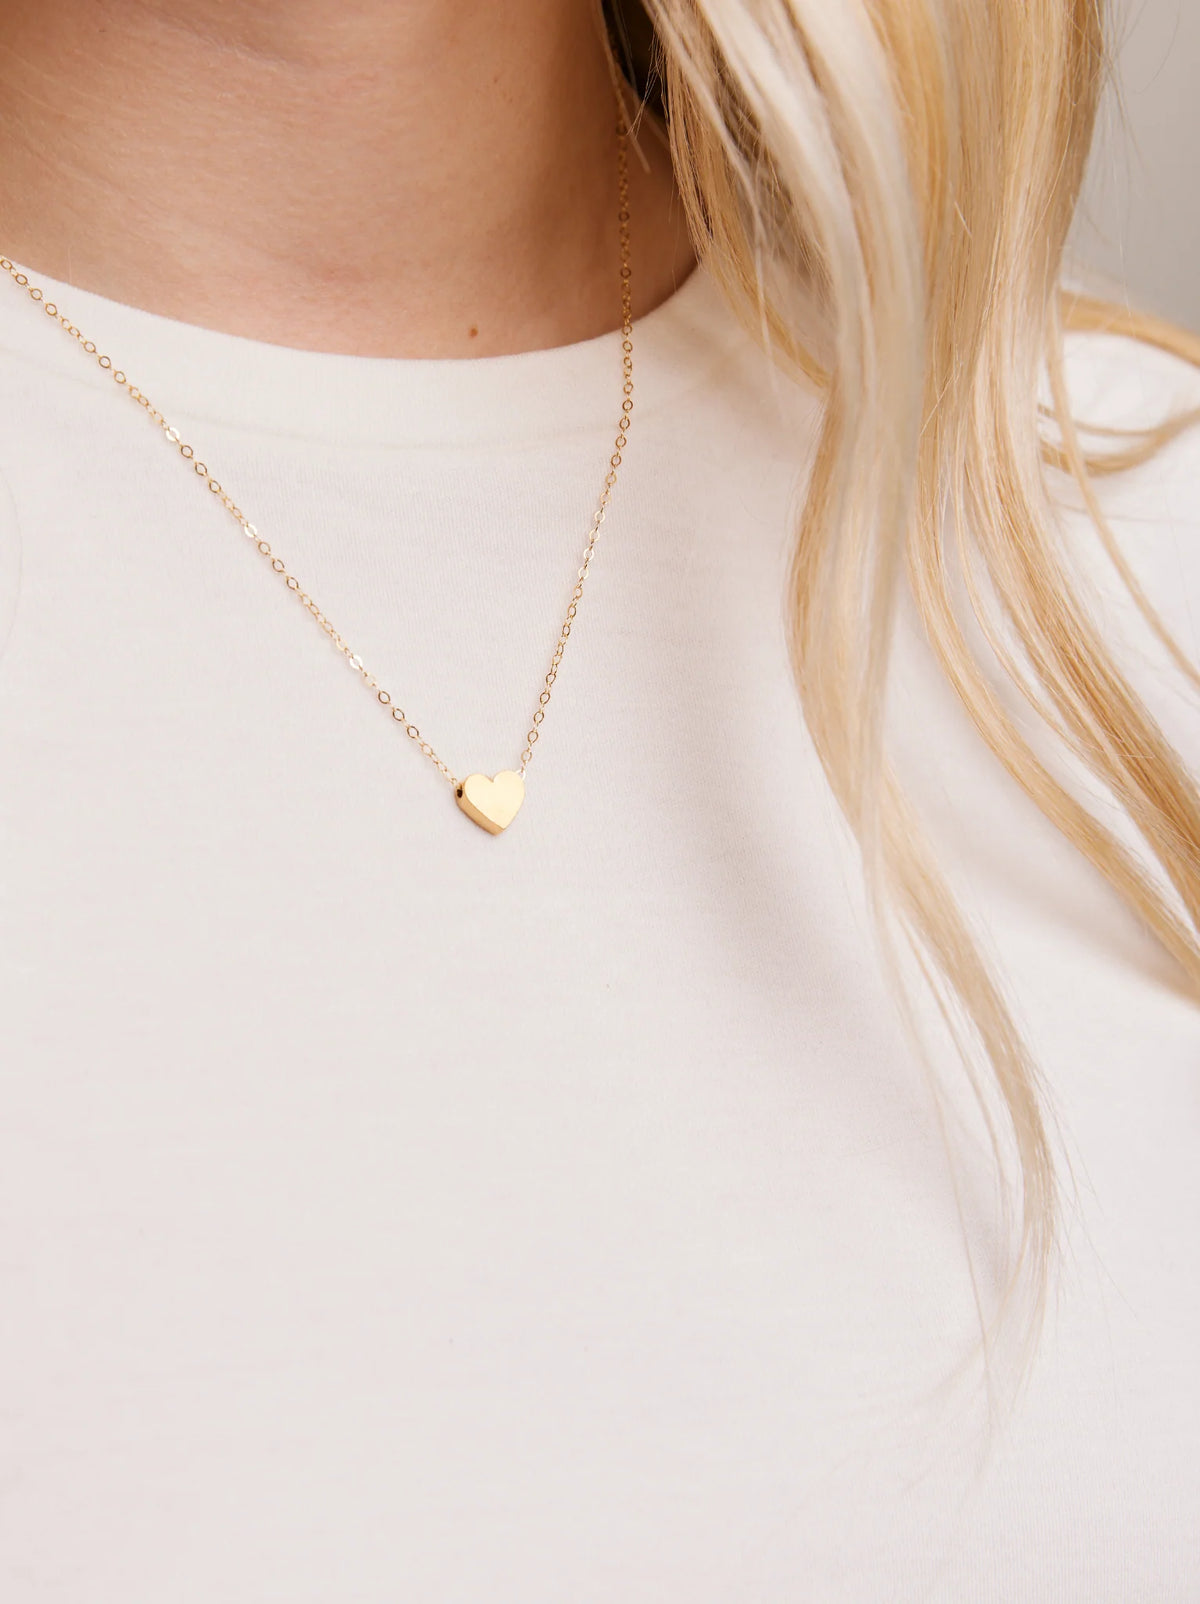 Canvas : Kinsley Padlock Initial Necklace in Worn Gold E